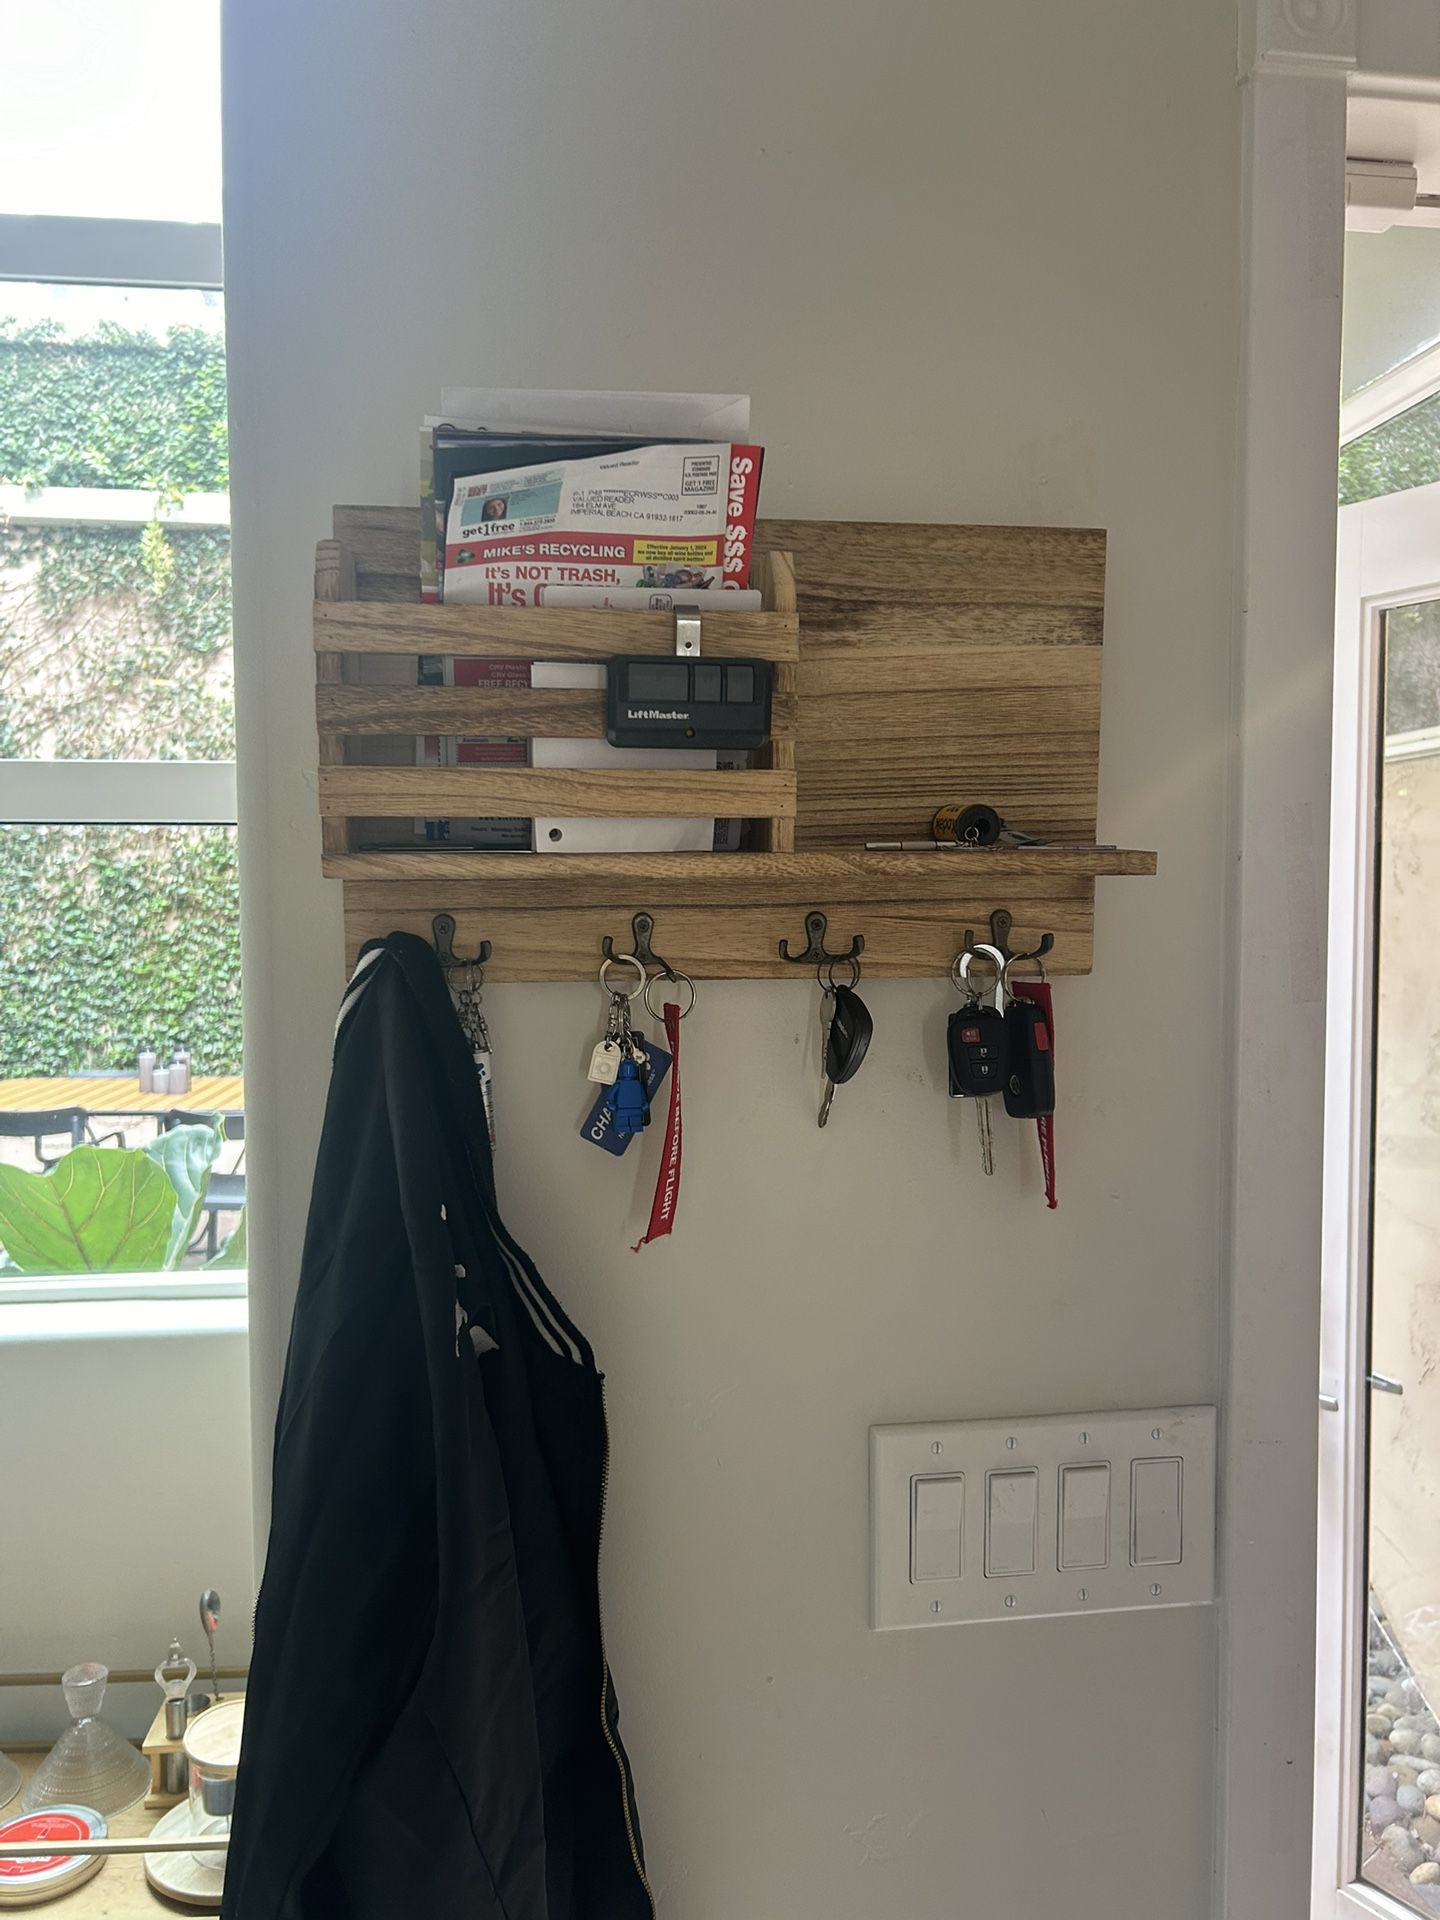 Key And Mail Wall Holder 